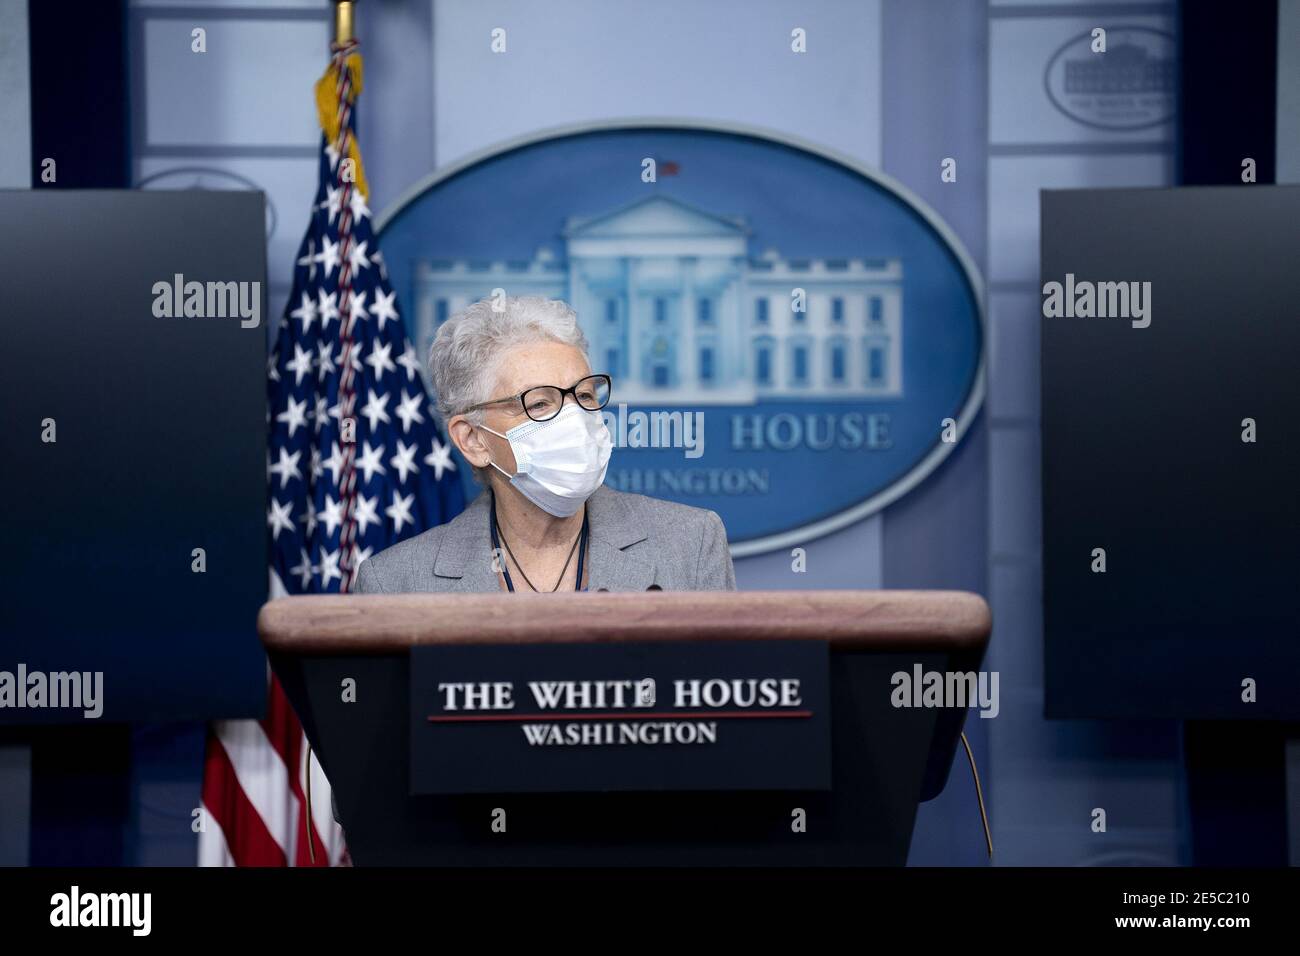 Washington, United States. 27th Jan, 2021. Gina McCarthy, National Climate Advisor, speaks during a news conference in the James S. Brady Press Briefing Room at the White House in Washington, DC, U.S., on Wednesday, Jan. 27, 2021. U.S. President Joe Biden will take executive action on Wednesday to combat climate change, including temporarily blocking new leases for oil drilling on federal lands, ordering a review of fossil-fuel subsidies and other measures to overhaul the U.S. energy mix. Credit: UPI/Alamy Live News Stock Photo